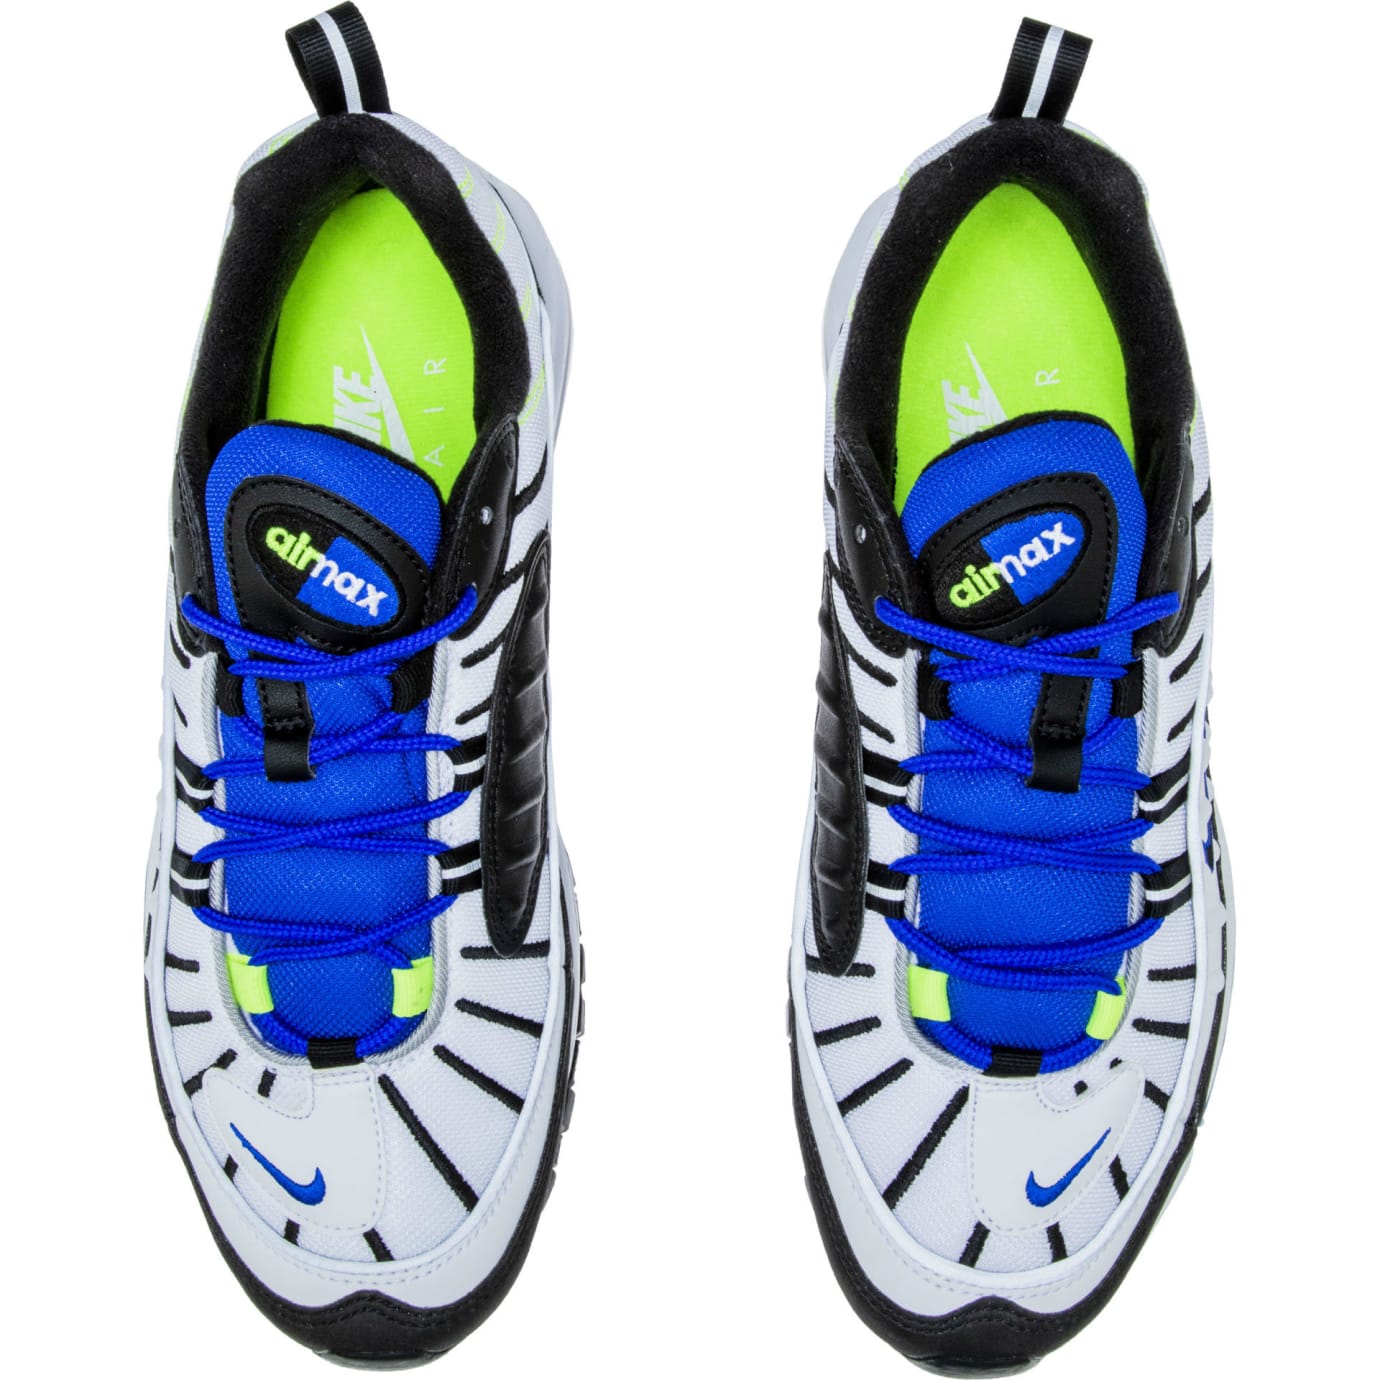 Nike Air Max 98 White Black Racer Blue Volt Release Date 103 Sole Collector